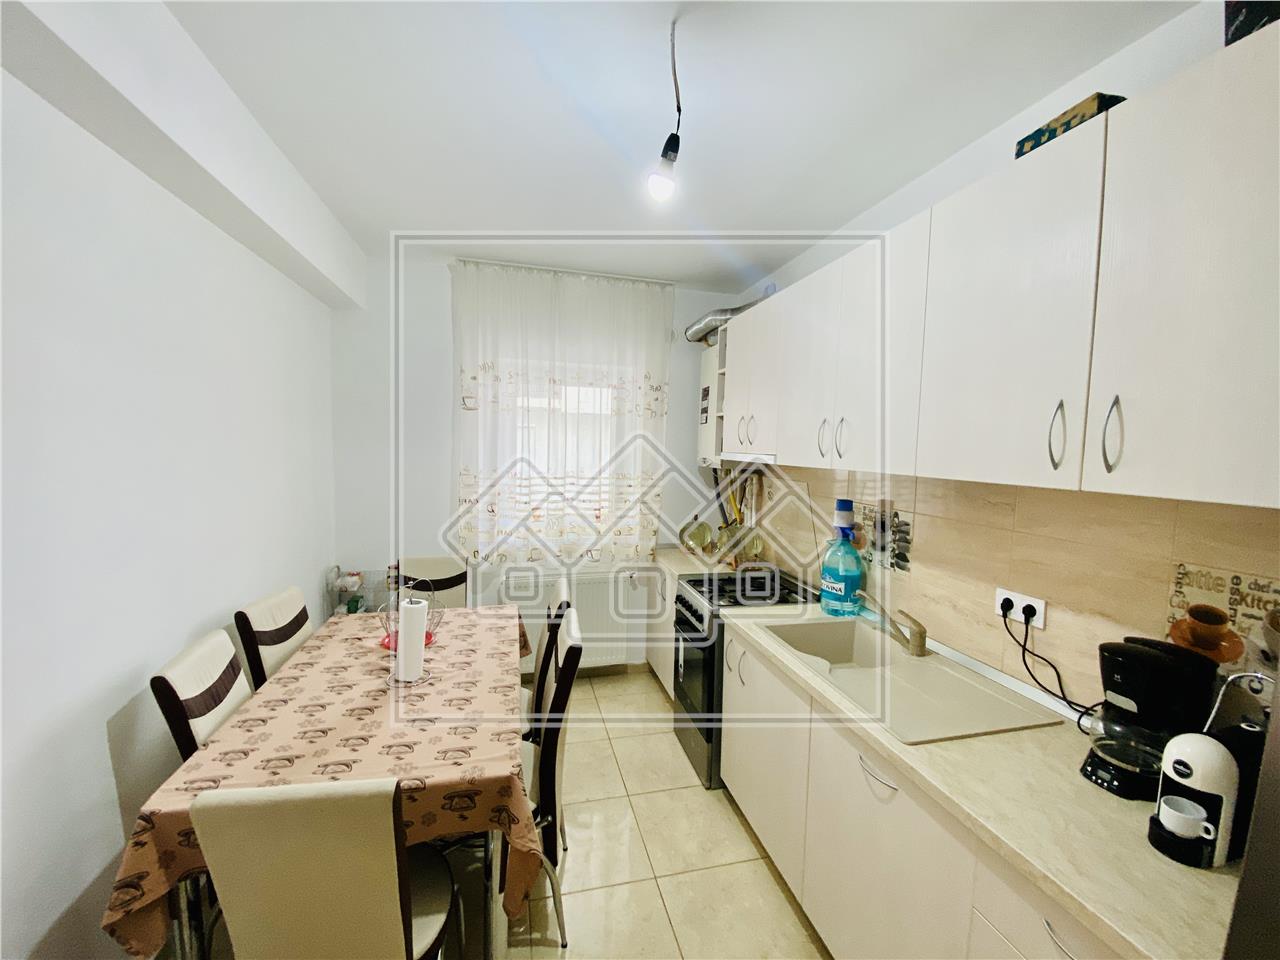 Apartment for sale in Sibiu - 3 rooms - 72 usable sqm - Selimbar